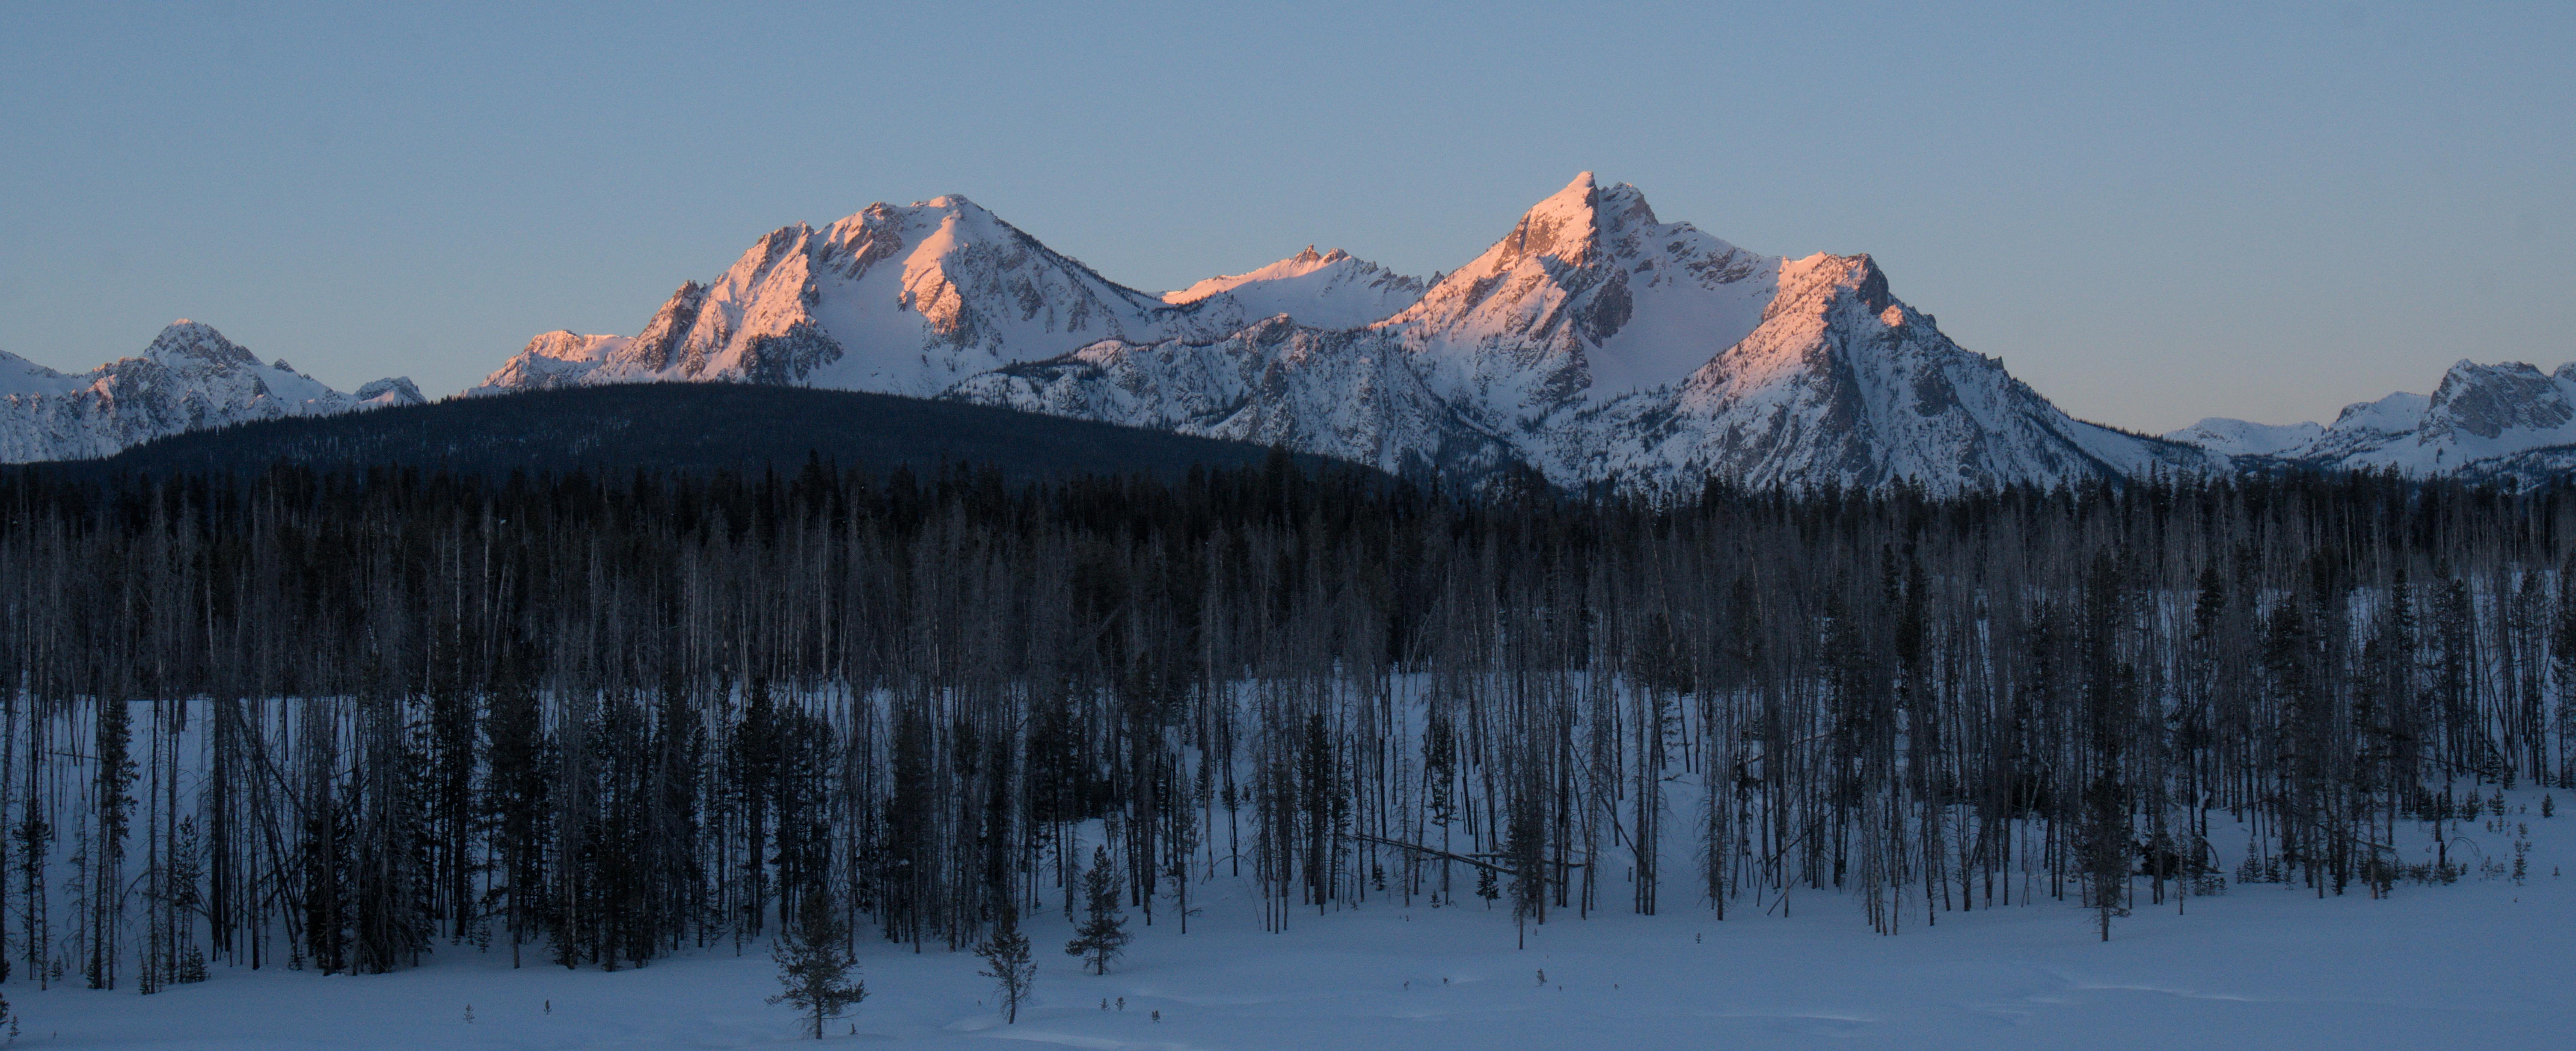 Snow Winter Mountains Landscape Nature Sunset Idaho USA North America Forest Pine Trees 6020x2457